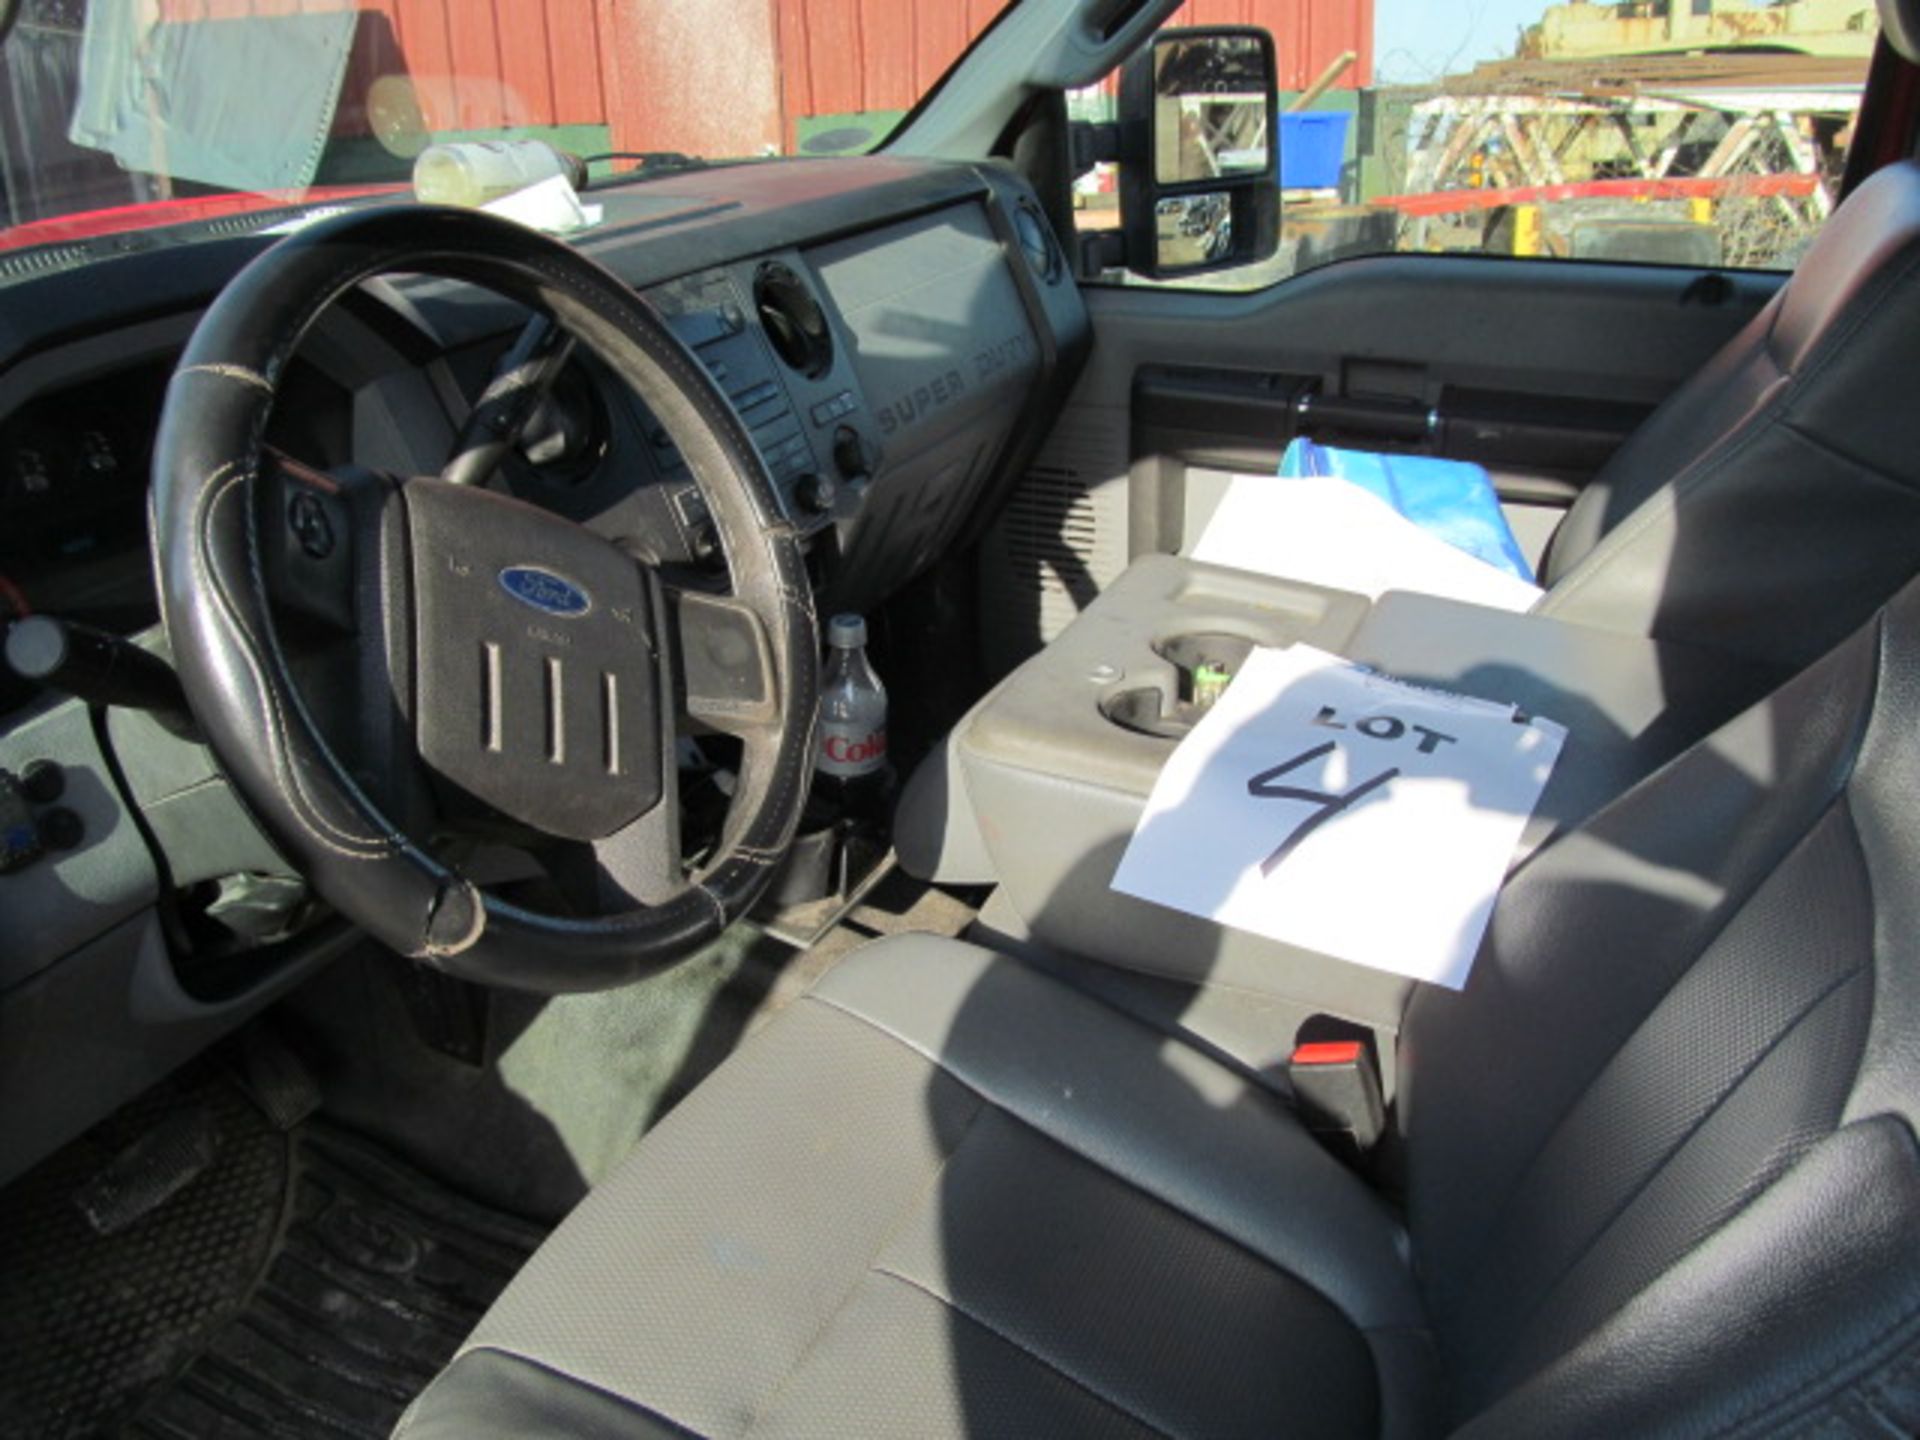 2013 Ford F350 Pickup Truck (VIN: 1FT8X3AT1EEAY7797) Estimated Mileage: 143735.0] (Subject To - Image 4 of 4